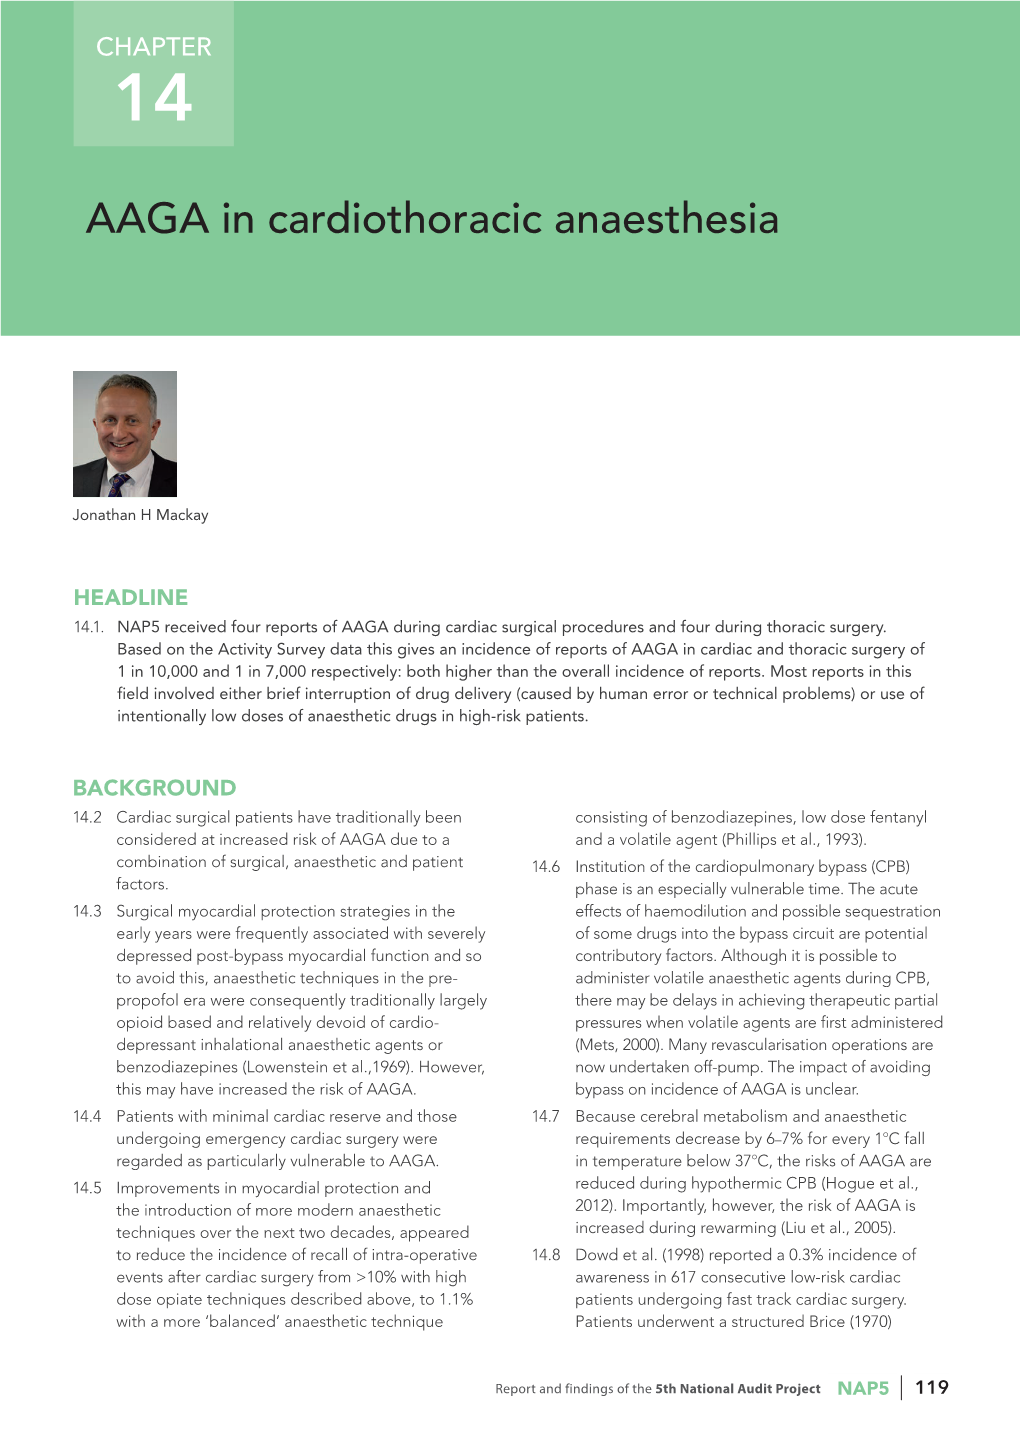 AAGA in Cardiothoracic Anaesthesia